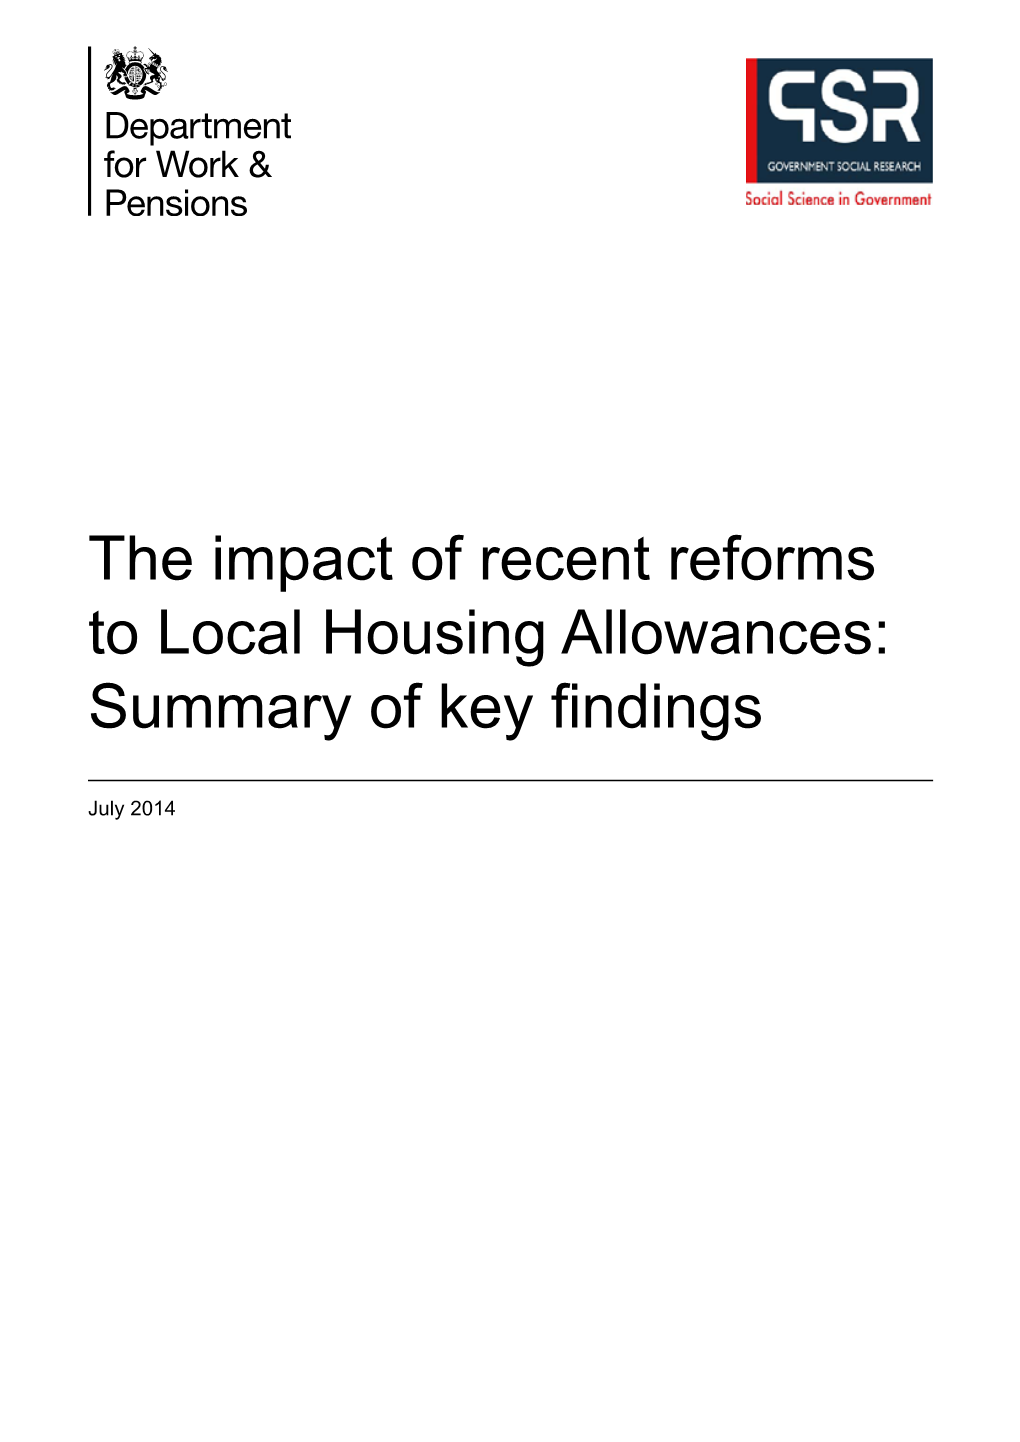 The Impact of Recent Reforms to Local Housing Allowances: Summary of Key Findings